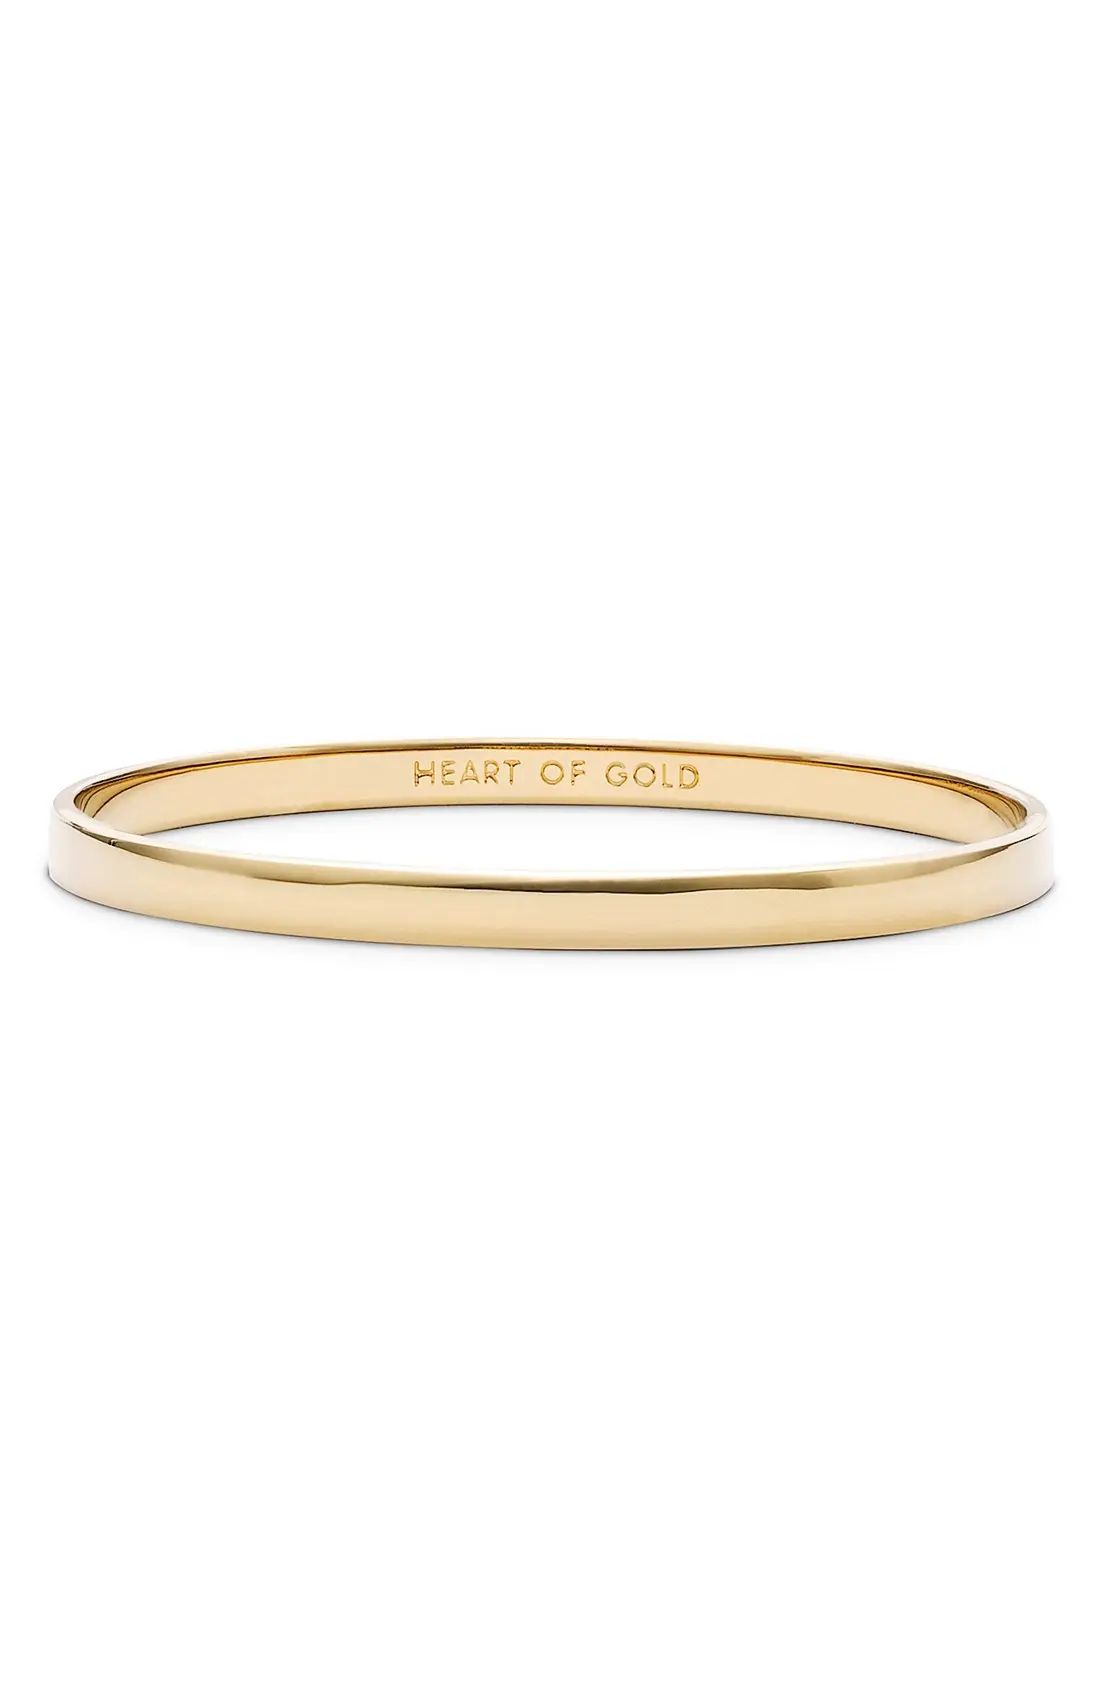 'idiom - heart of gold' bangle | Nordstrom